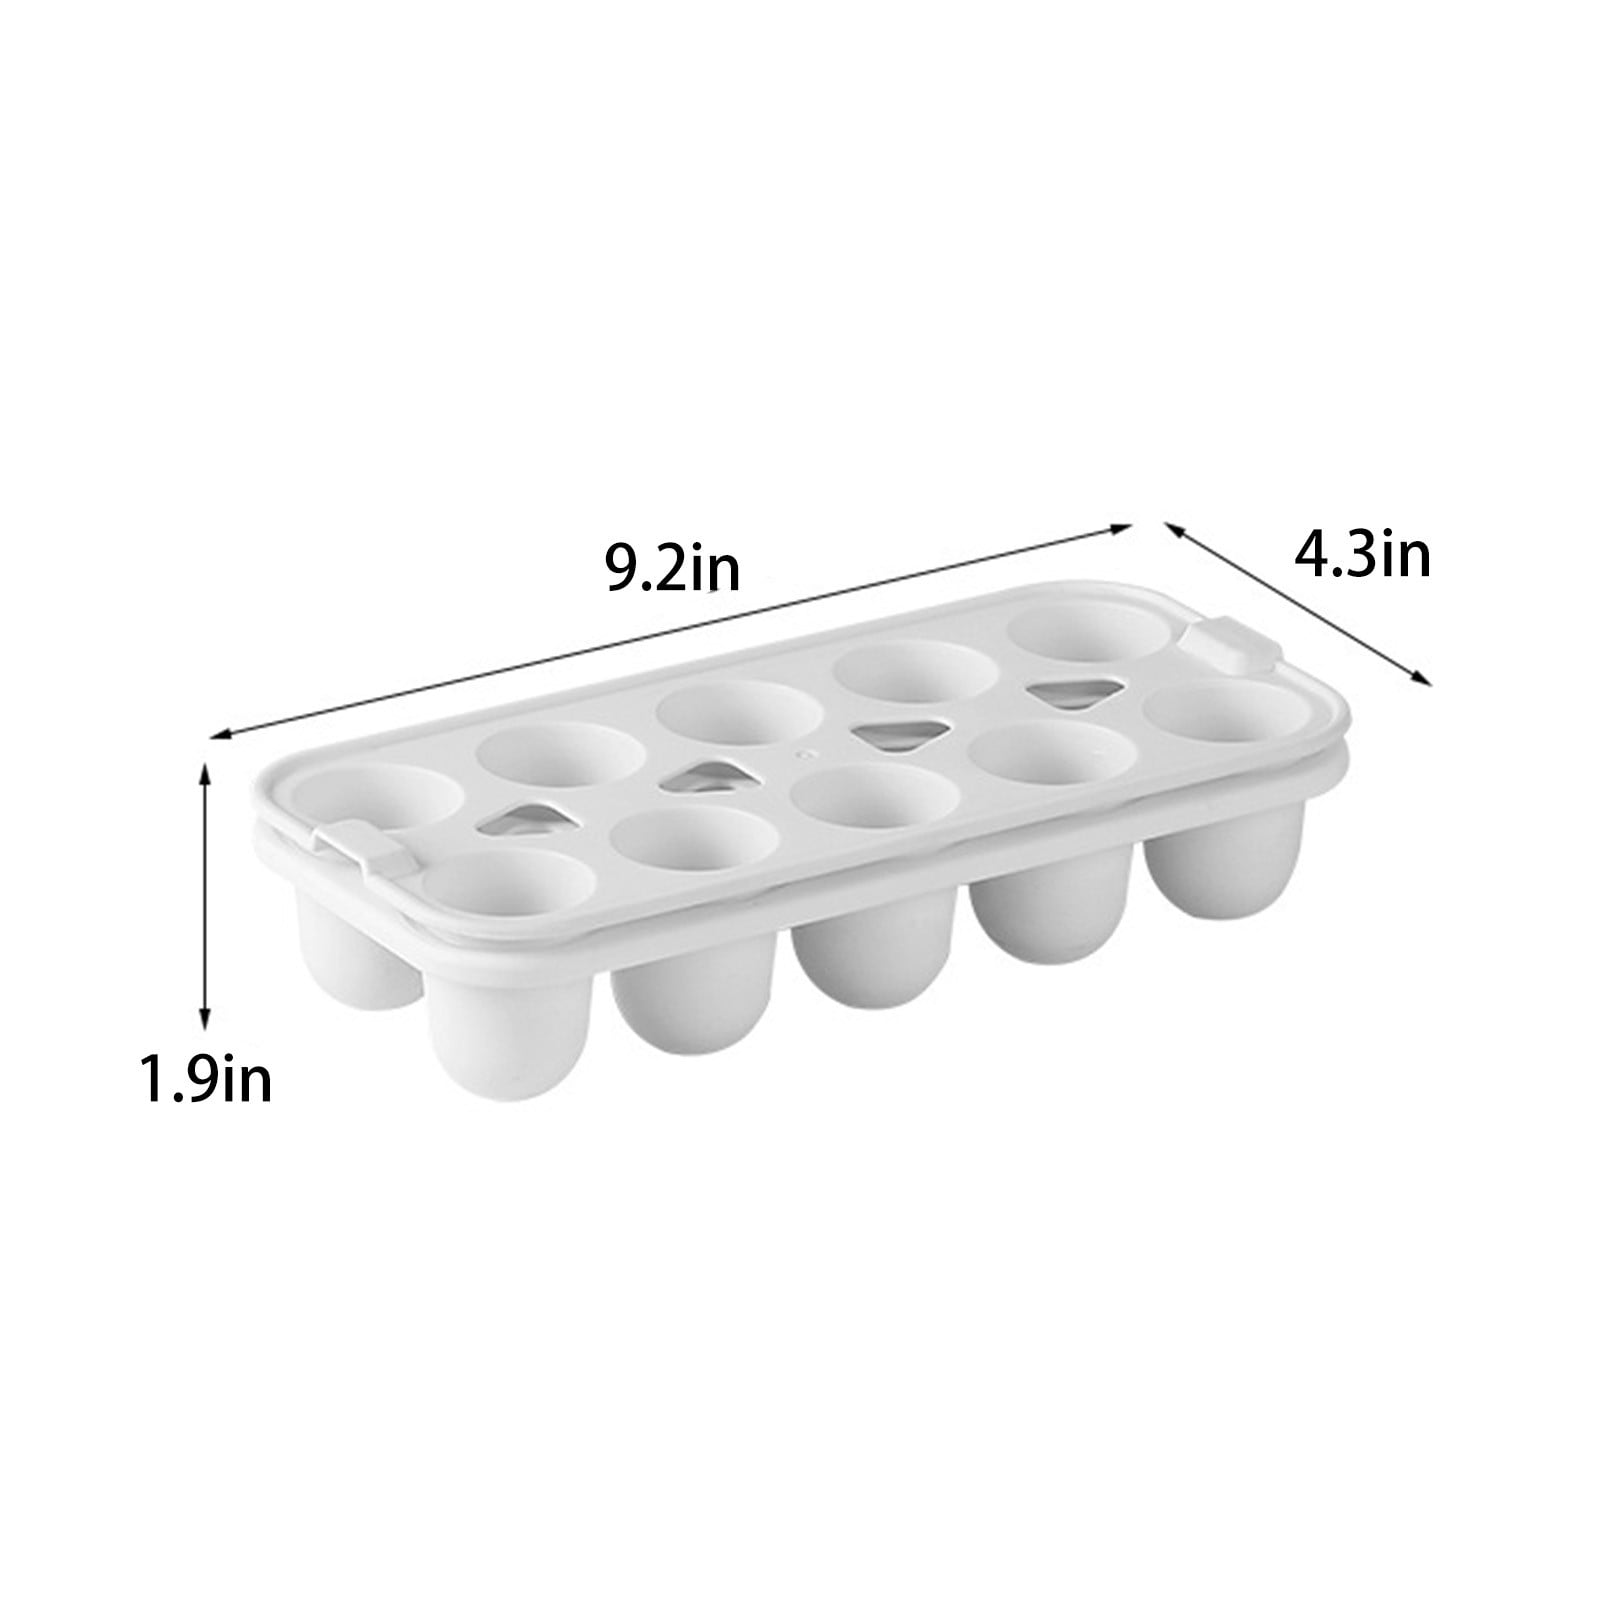 Vikakiooze Ice Cube Trays For Freezer Spherical Ice Compartment, 18  Compartment Spherical Ice Ball Machine Ice Maker For Whisky, Cocktails And  Homemade Drinks, Keep Drinks Cold 